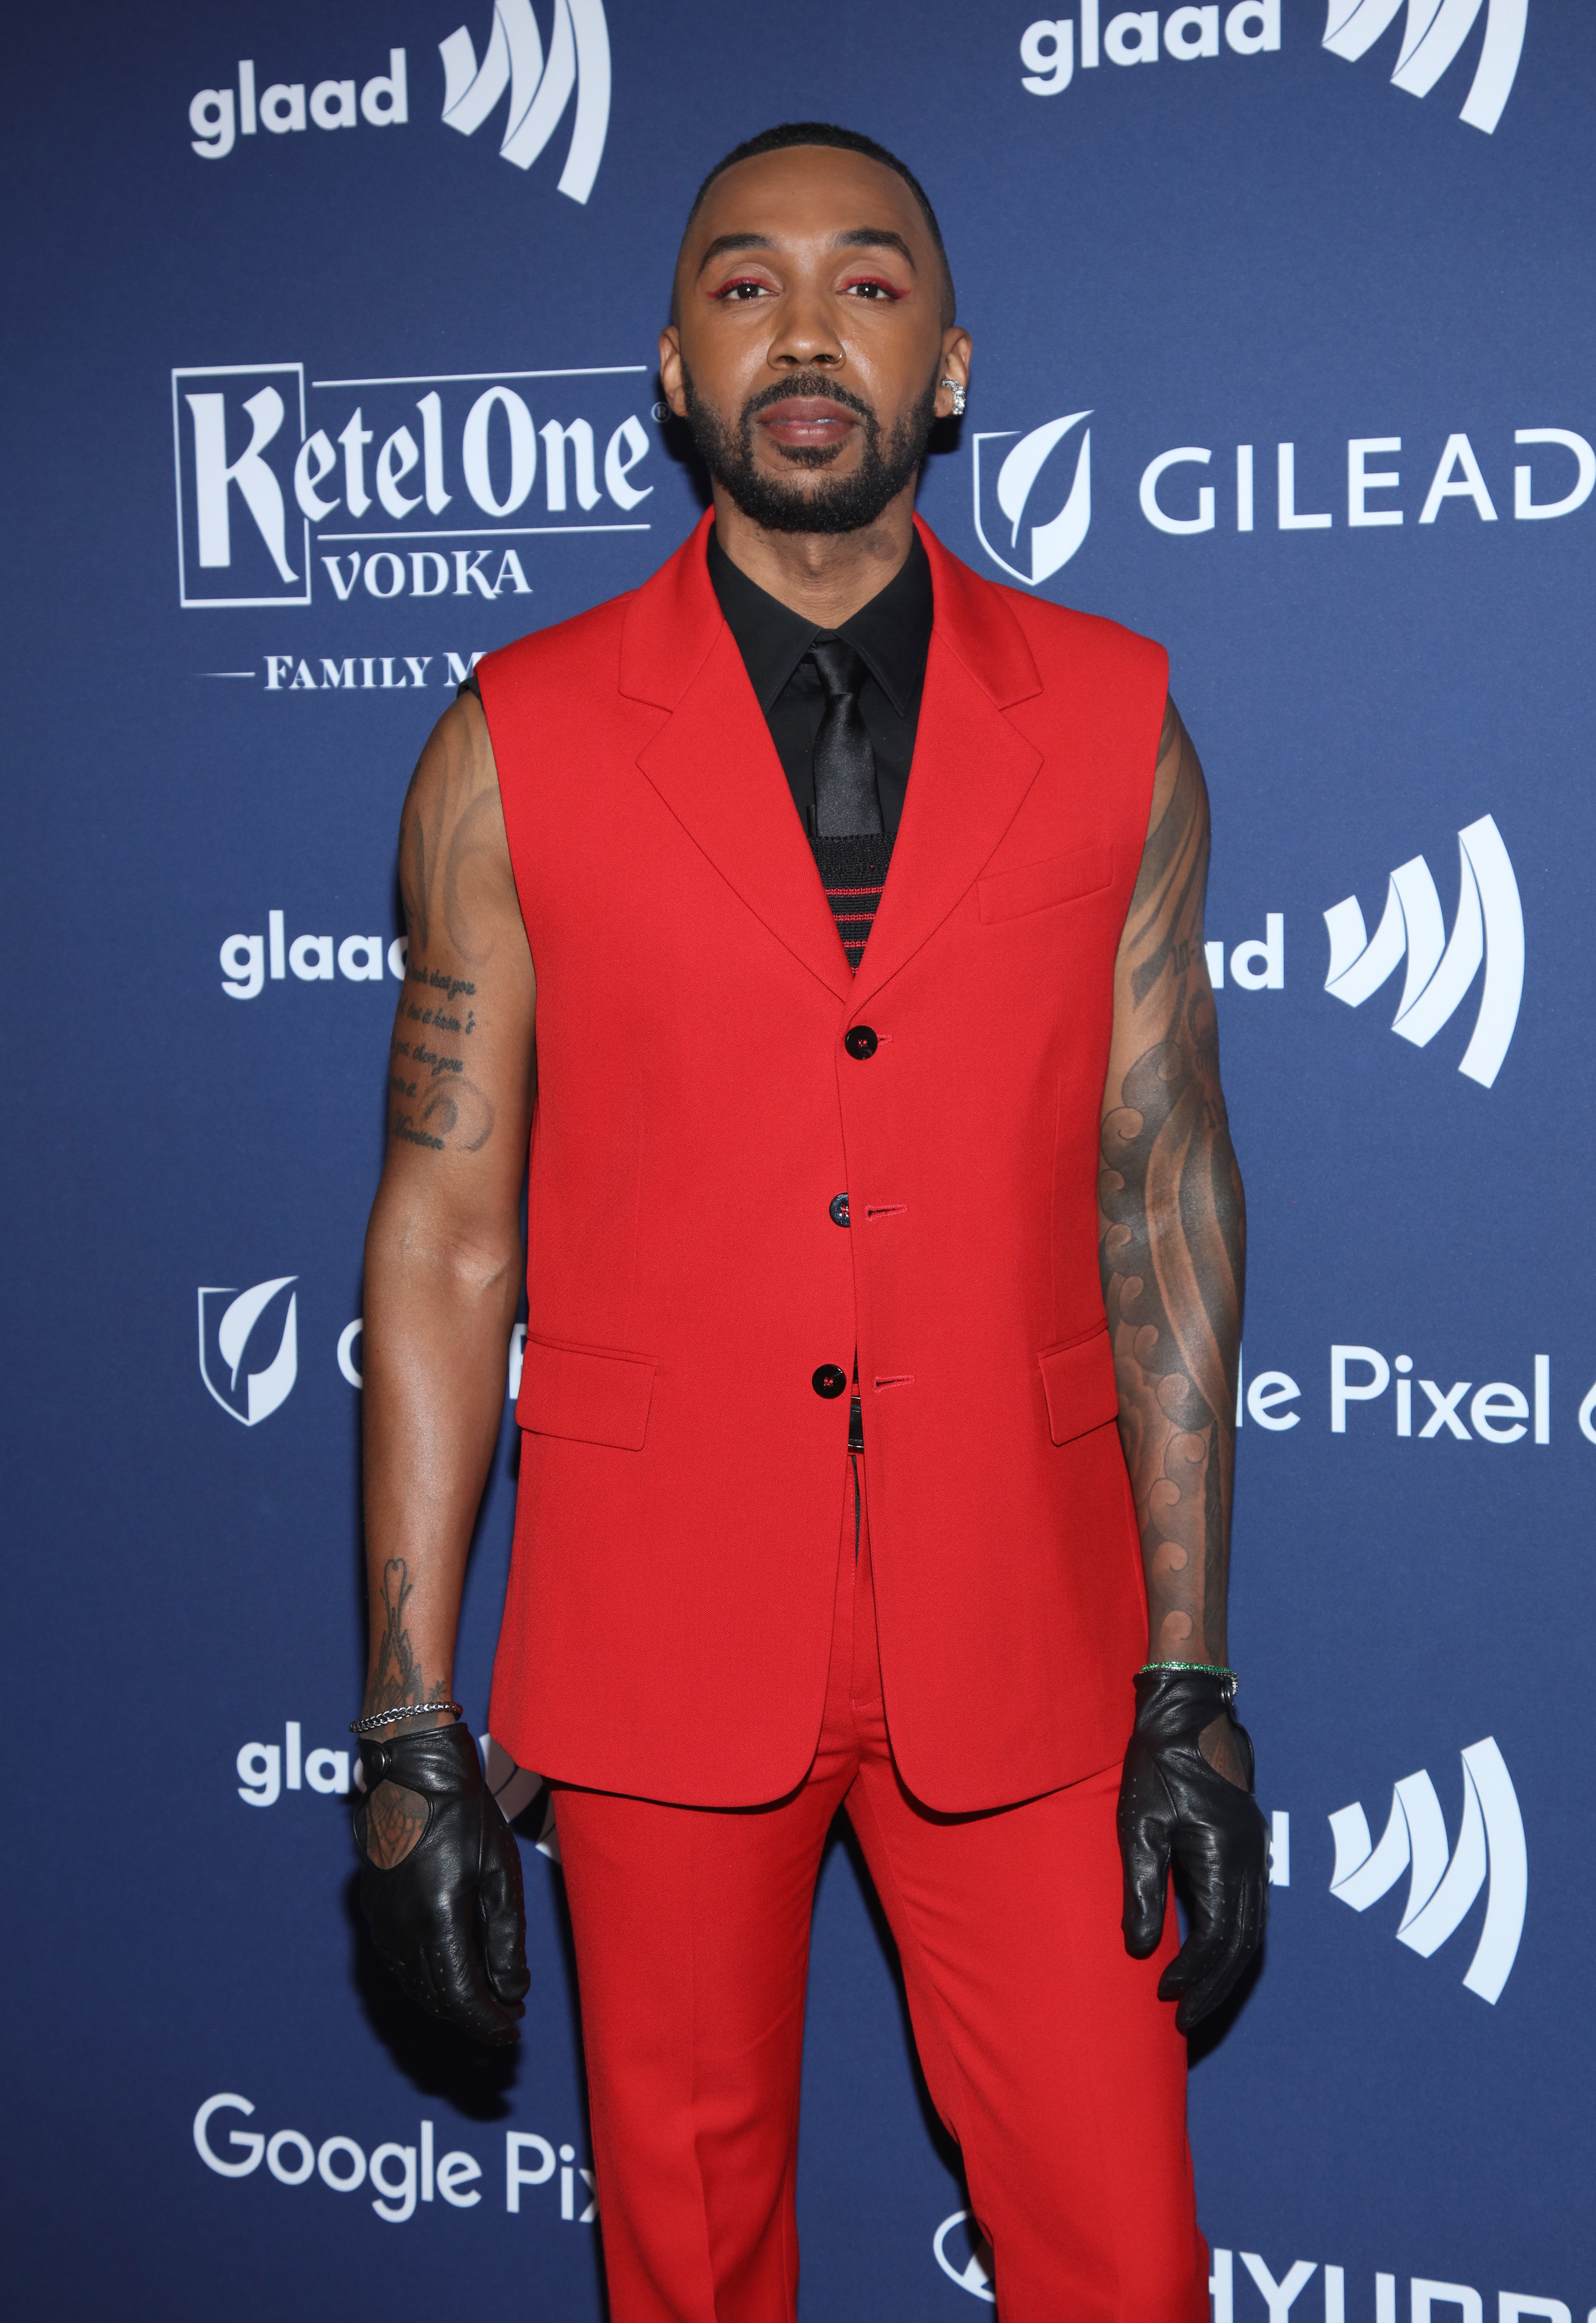 George in a sleeveless suit with shirt and gloves posing at a GLAAD event